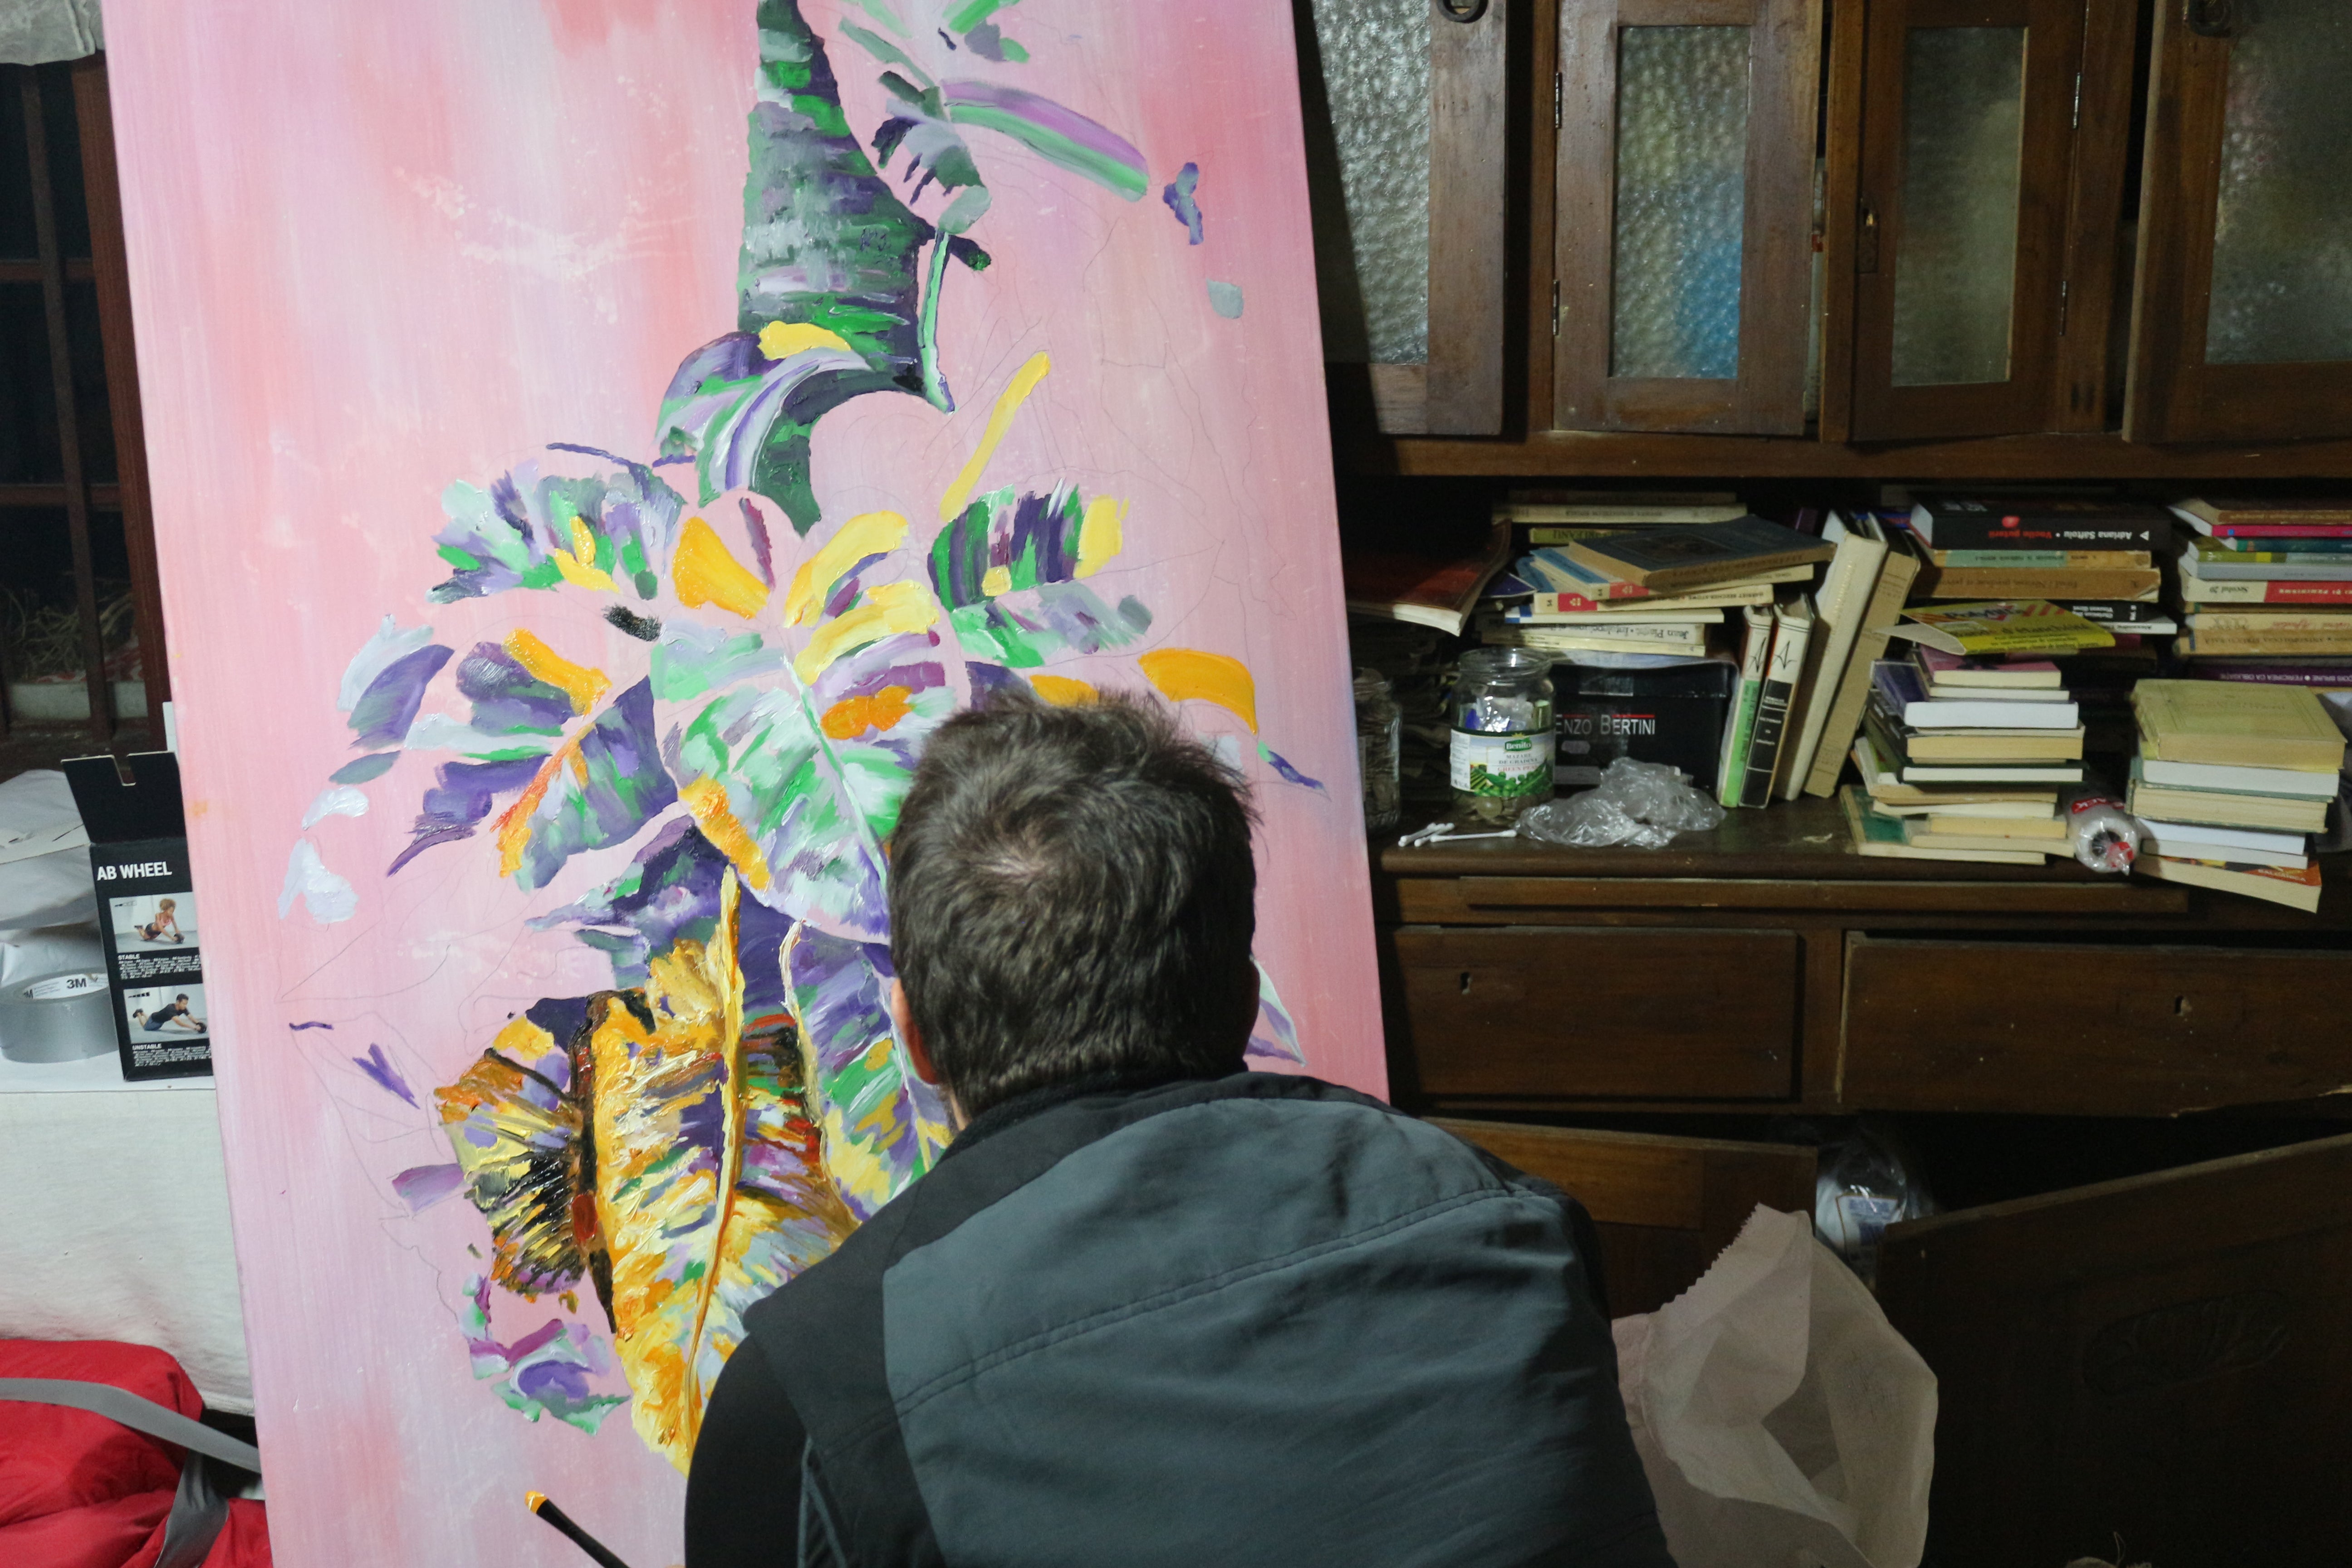 Dominic Virtosu painting the artwork "Jungle" in the winter between 2018 and 2019 in his country-side studio in Romania.